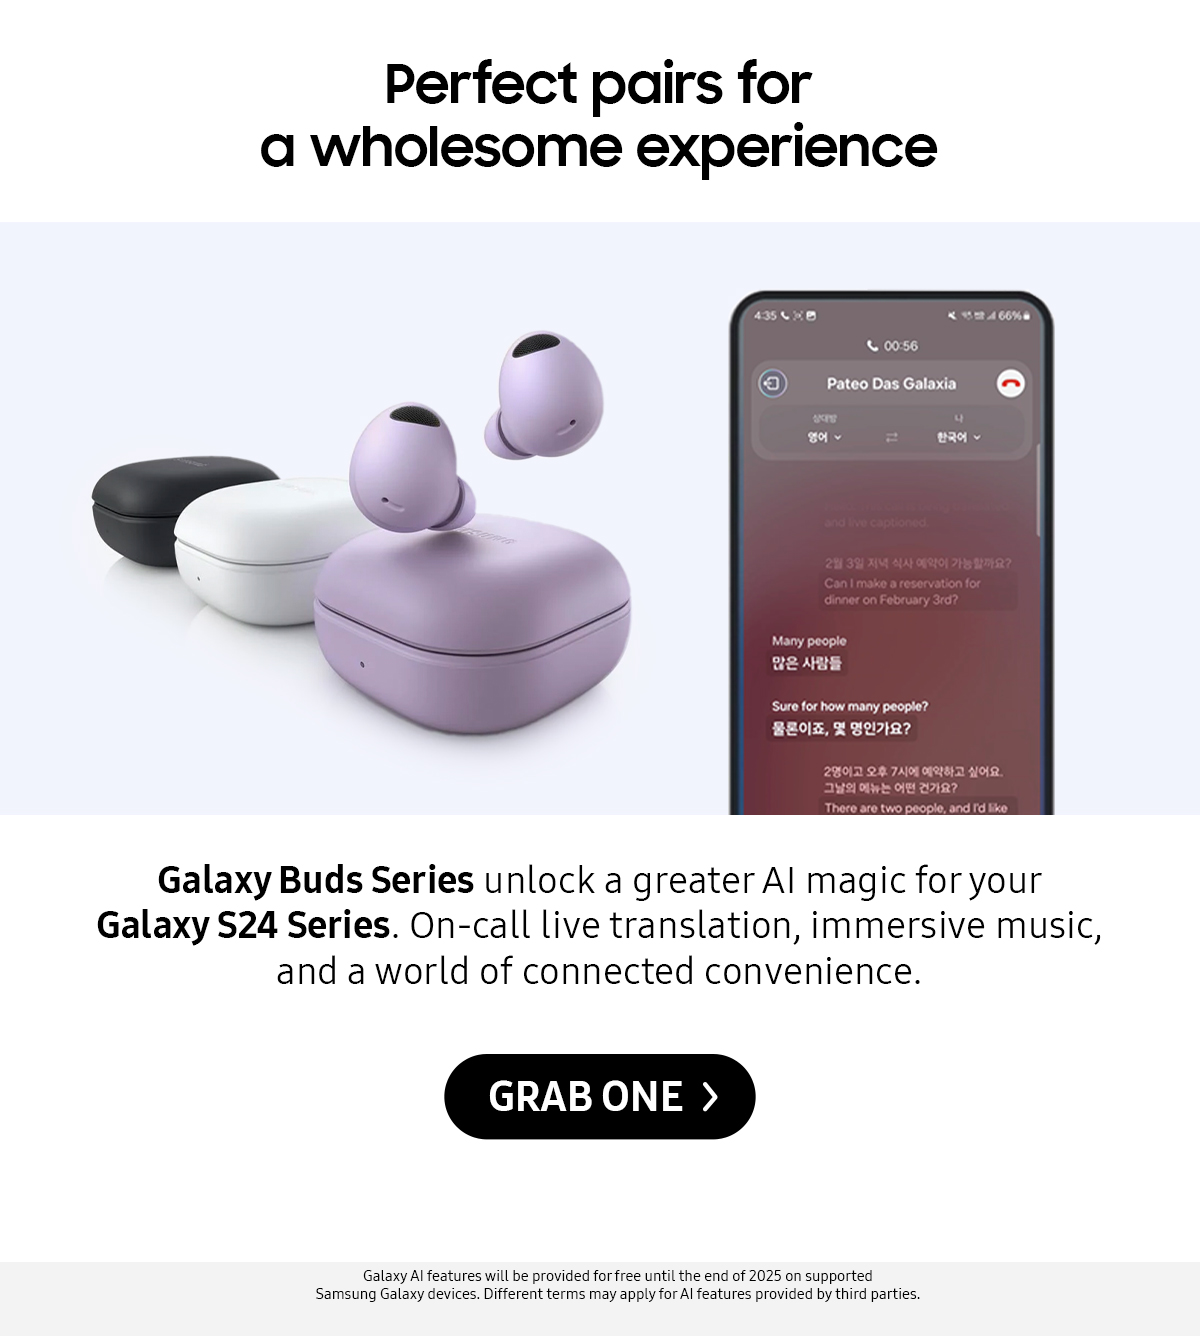 Perfect pairs for a wholesome experience | Galaxy Buds Series unlock a greater Al magic for your Galaxy 524 Series. On-call live translation, immersive music, and a world of connected convenience.